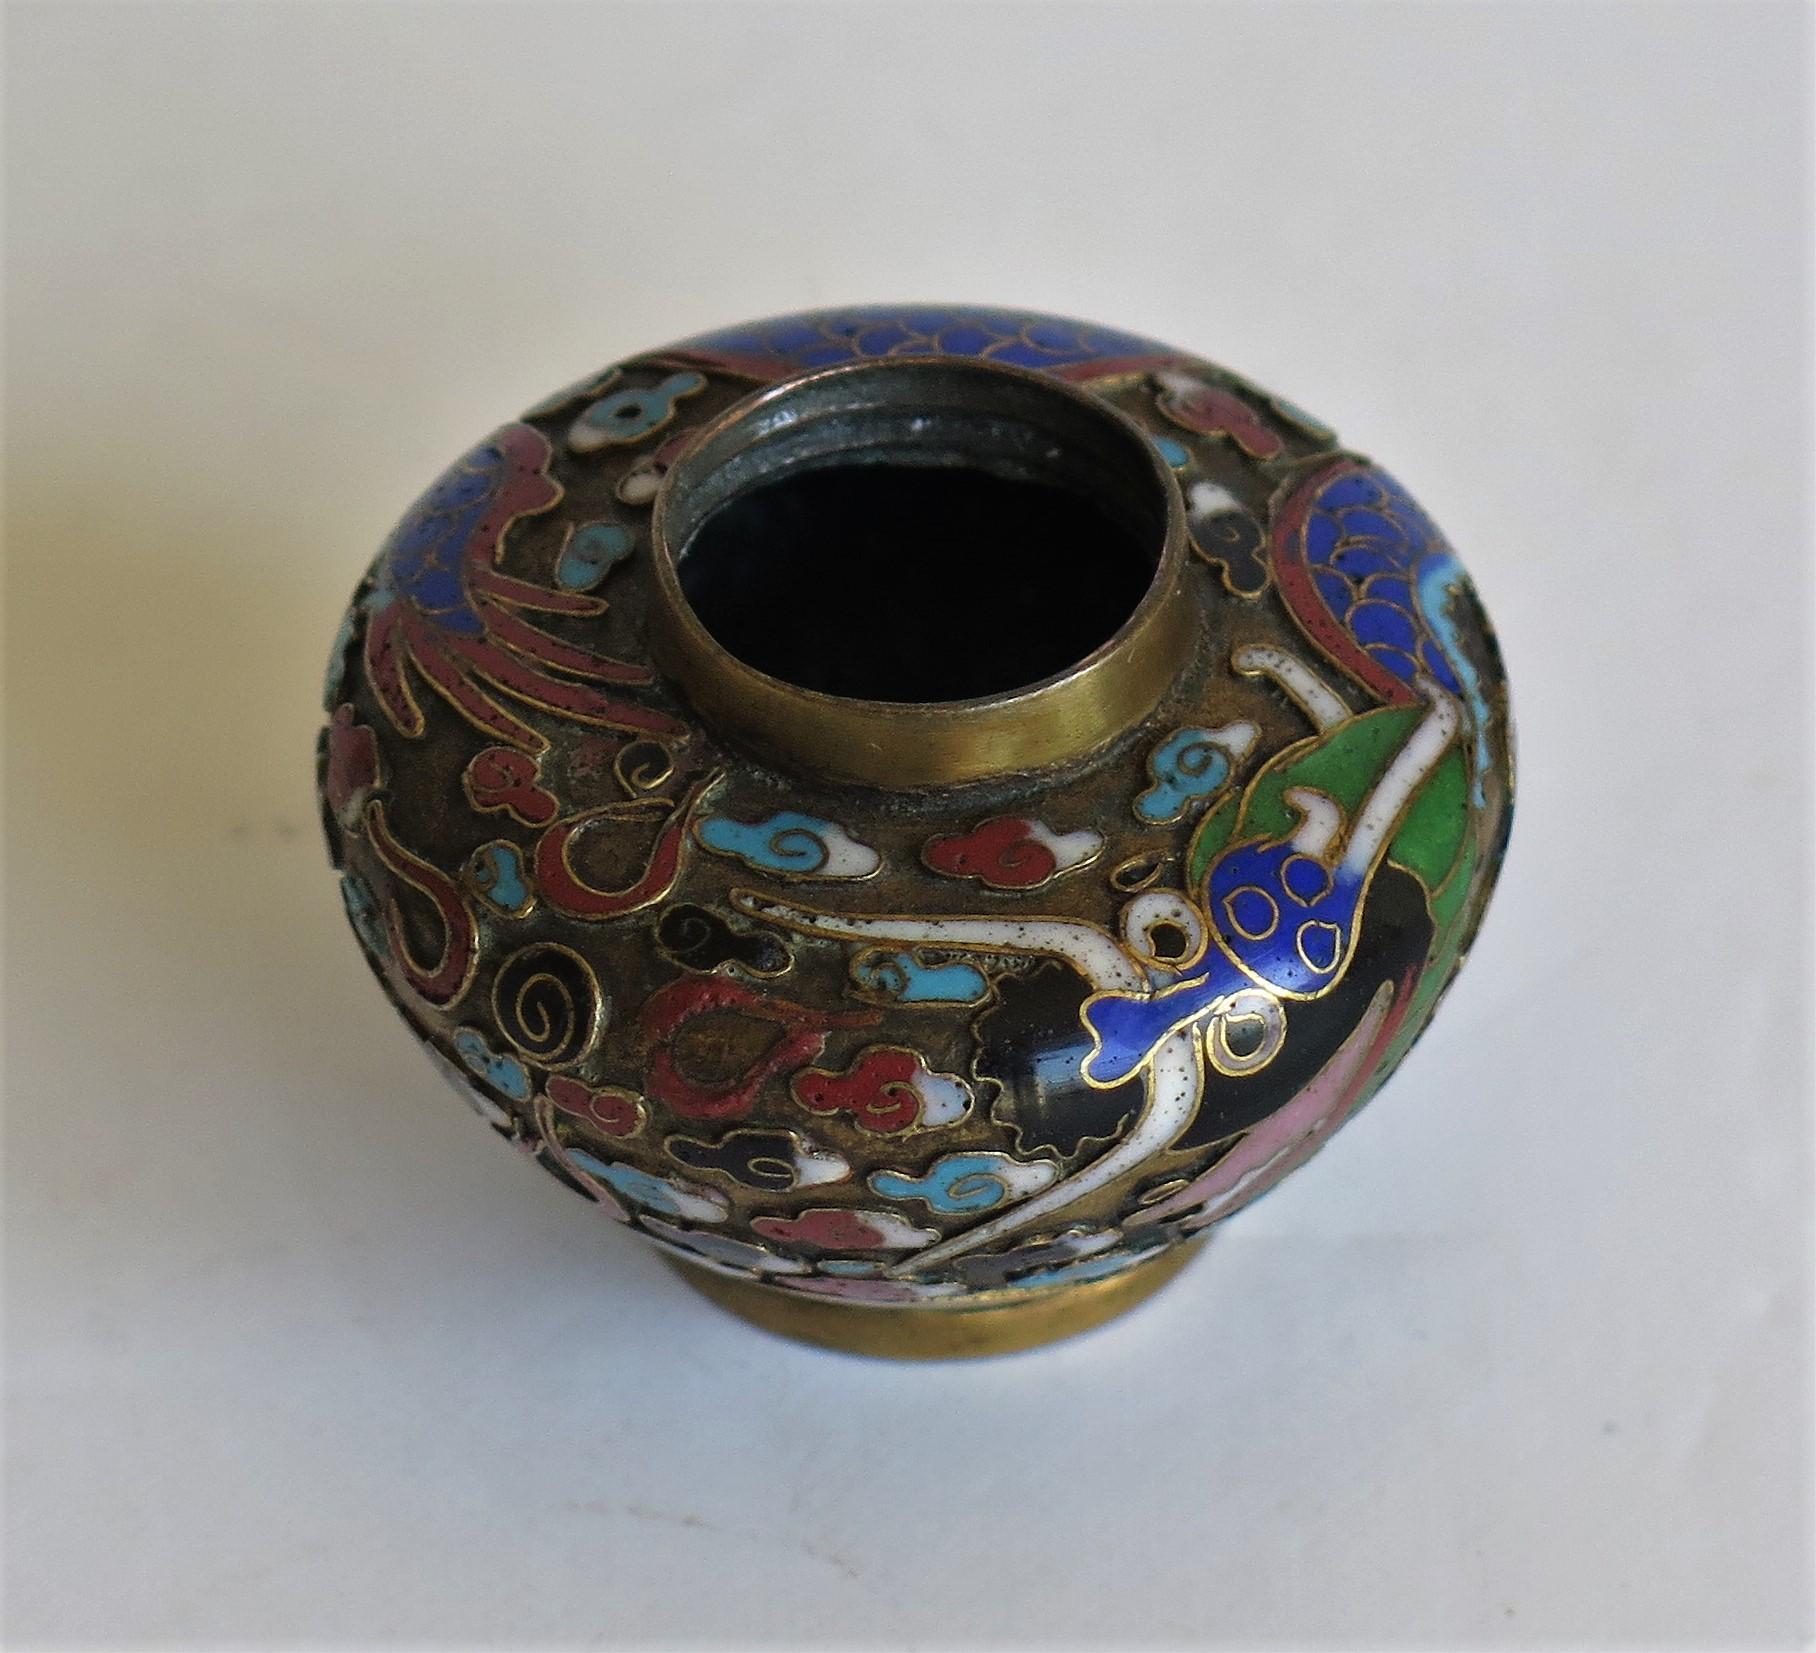 19th Century Chinese Cloisonné Pepper Pot with Dragon Decoration, Qing Dynasty 7